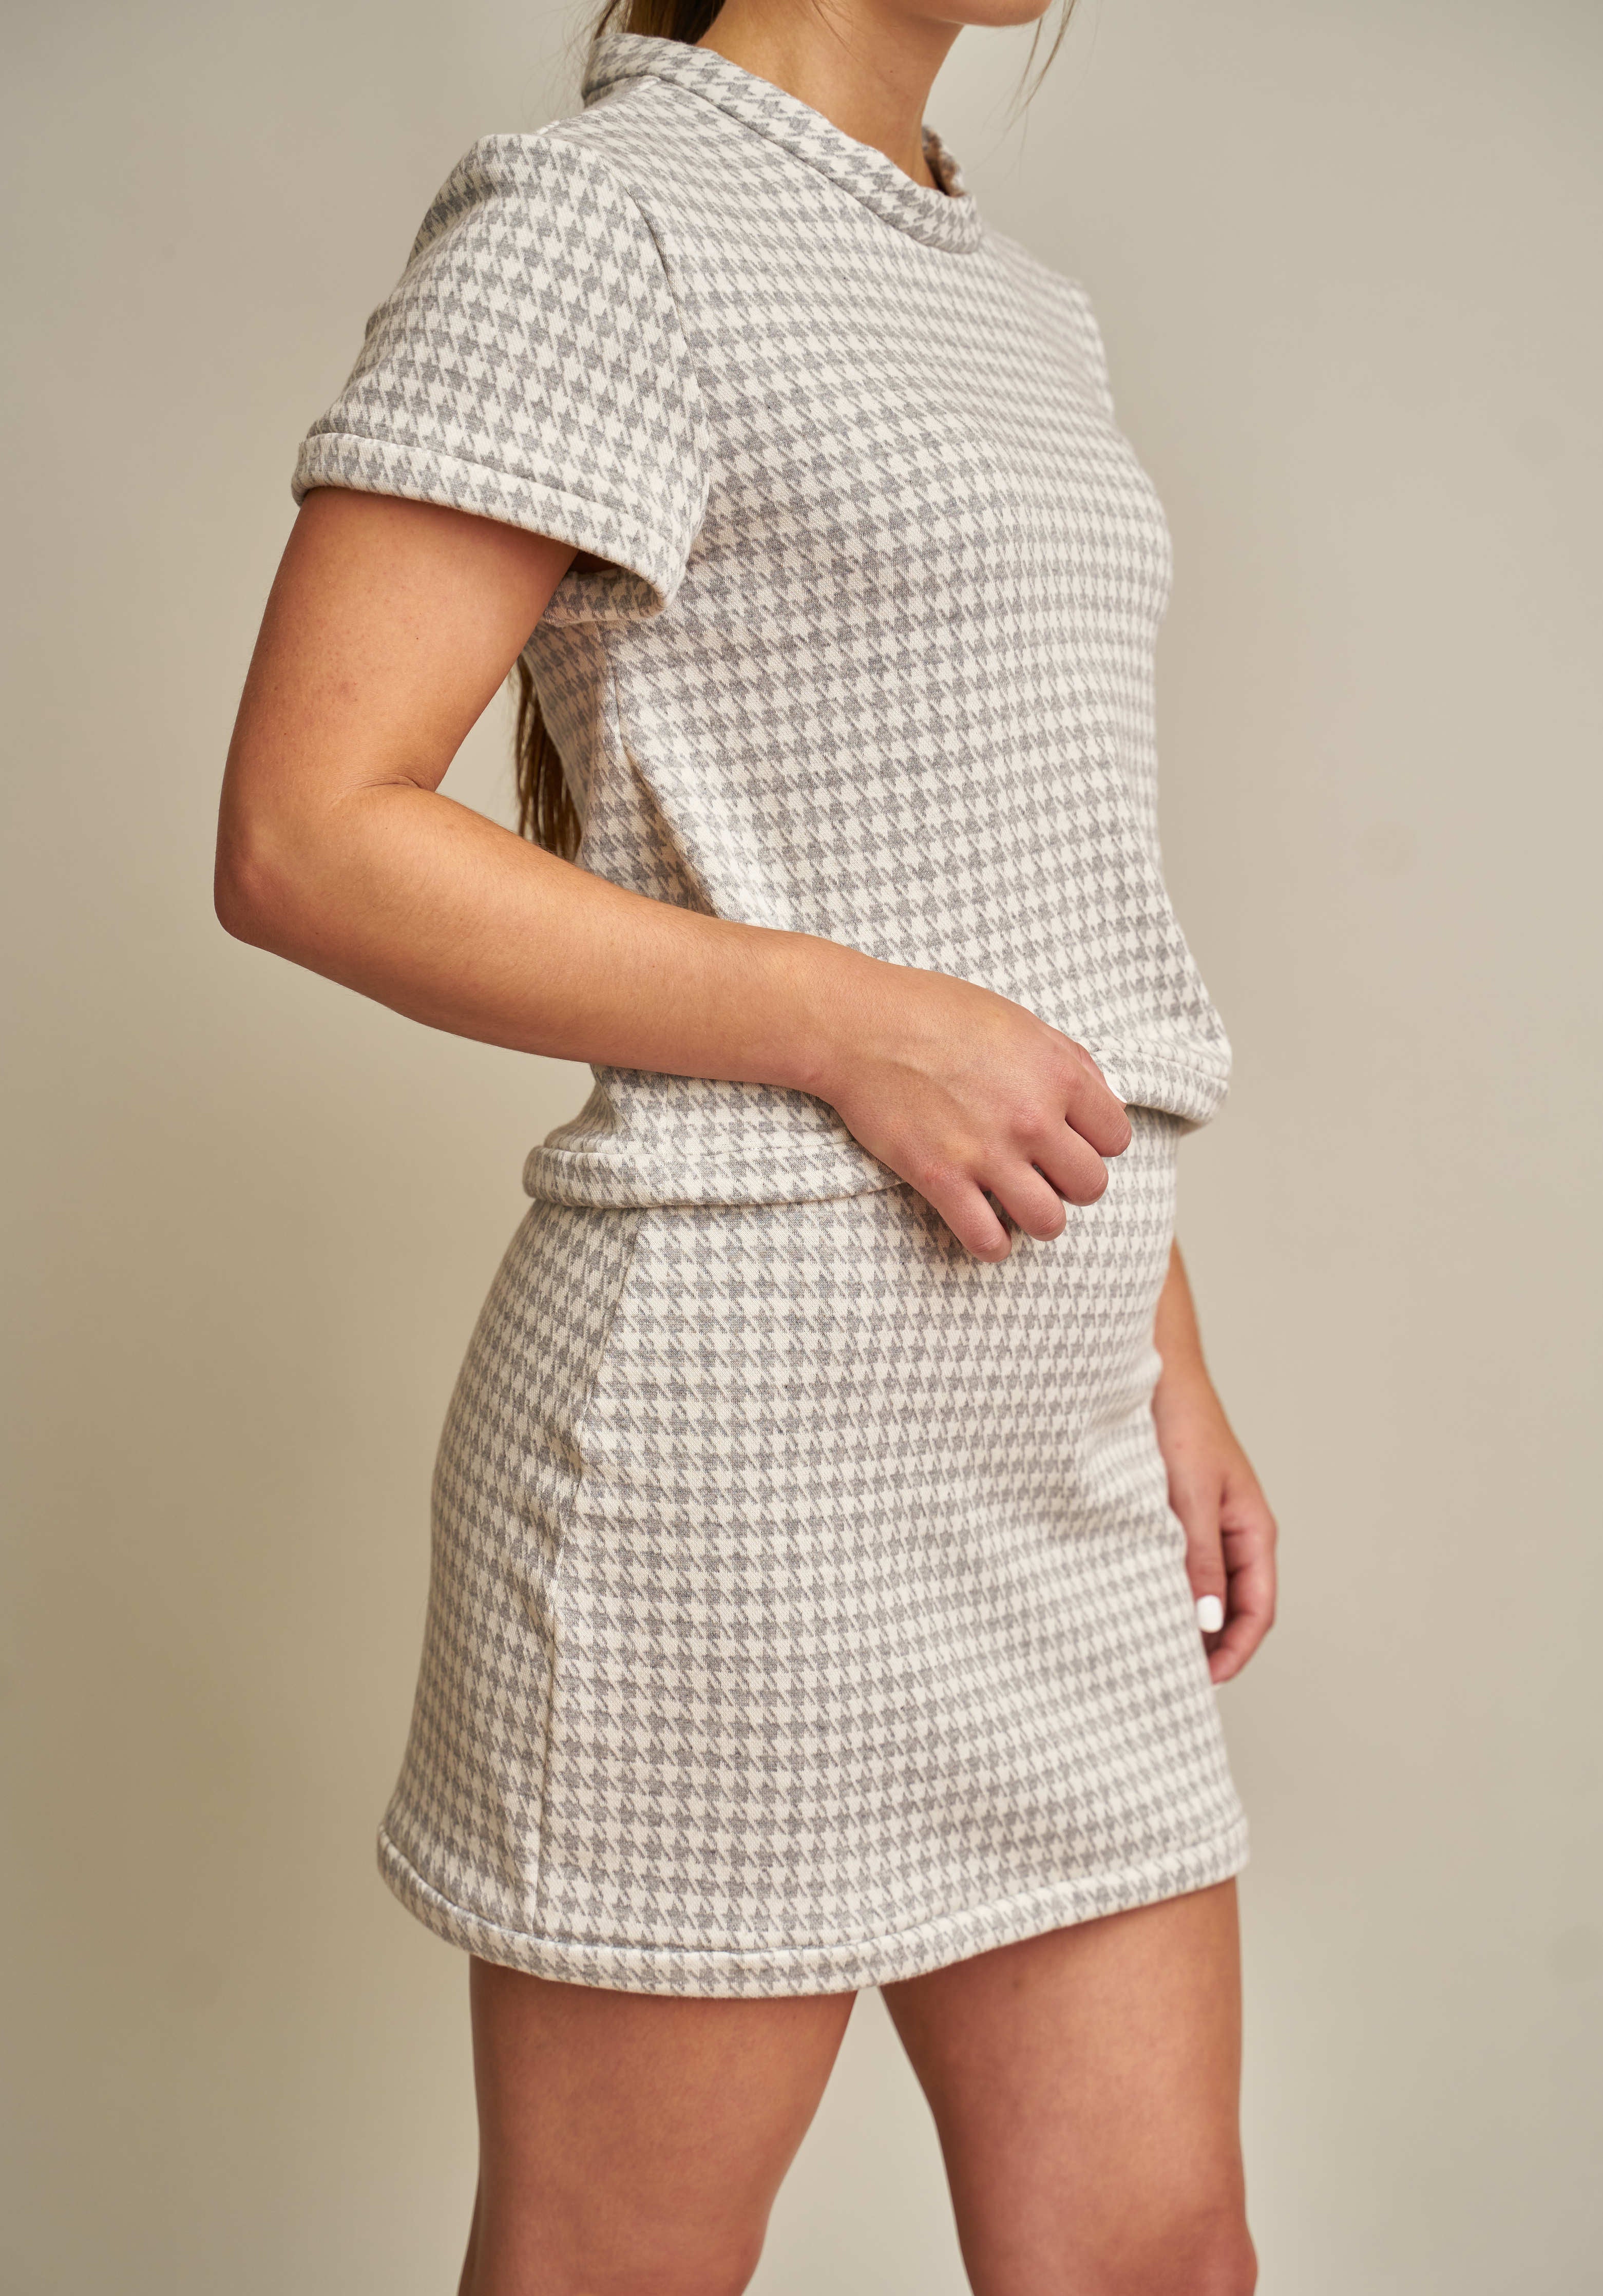 Women’s Skirts | Emily Westenberger | The Mickayla knit top in houndstooth Full outfit